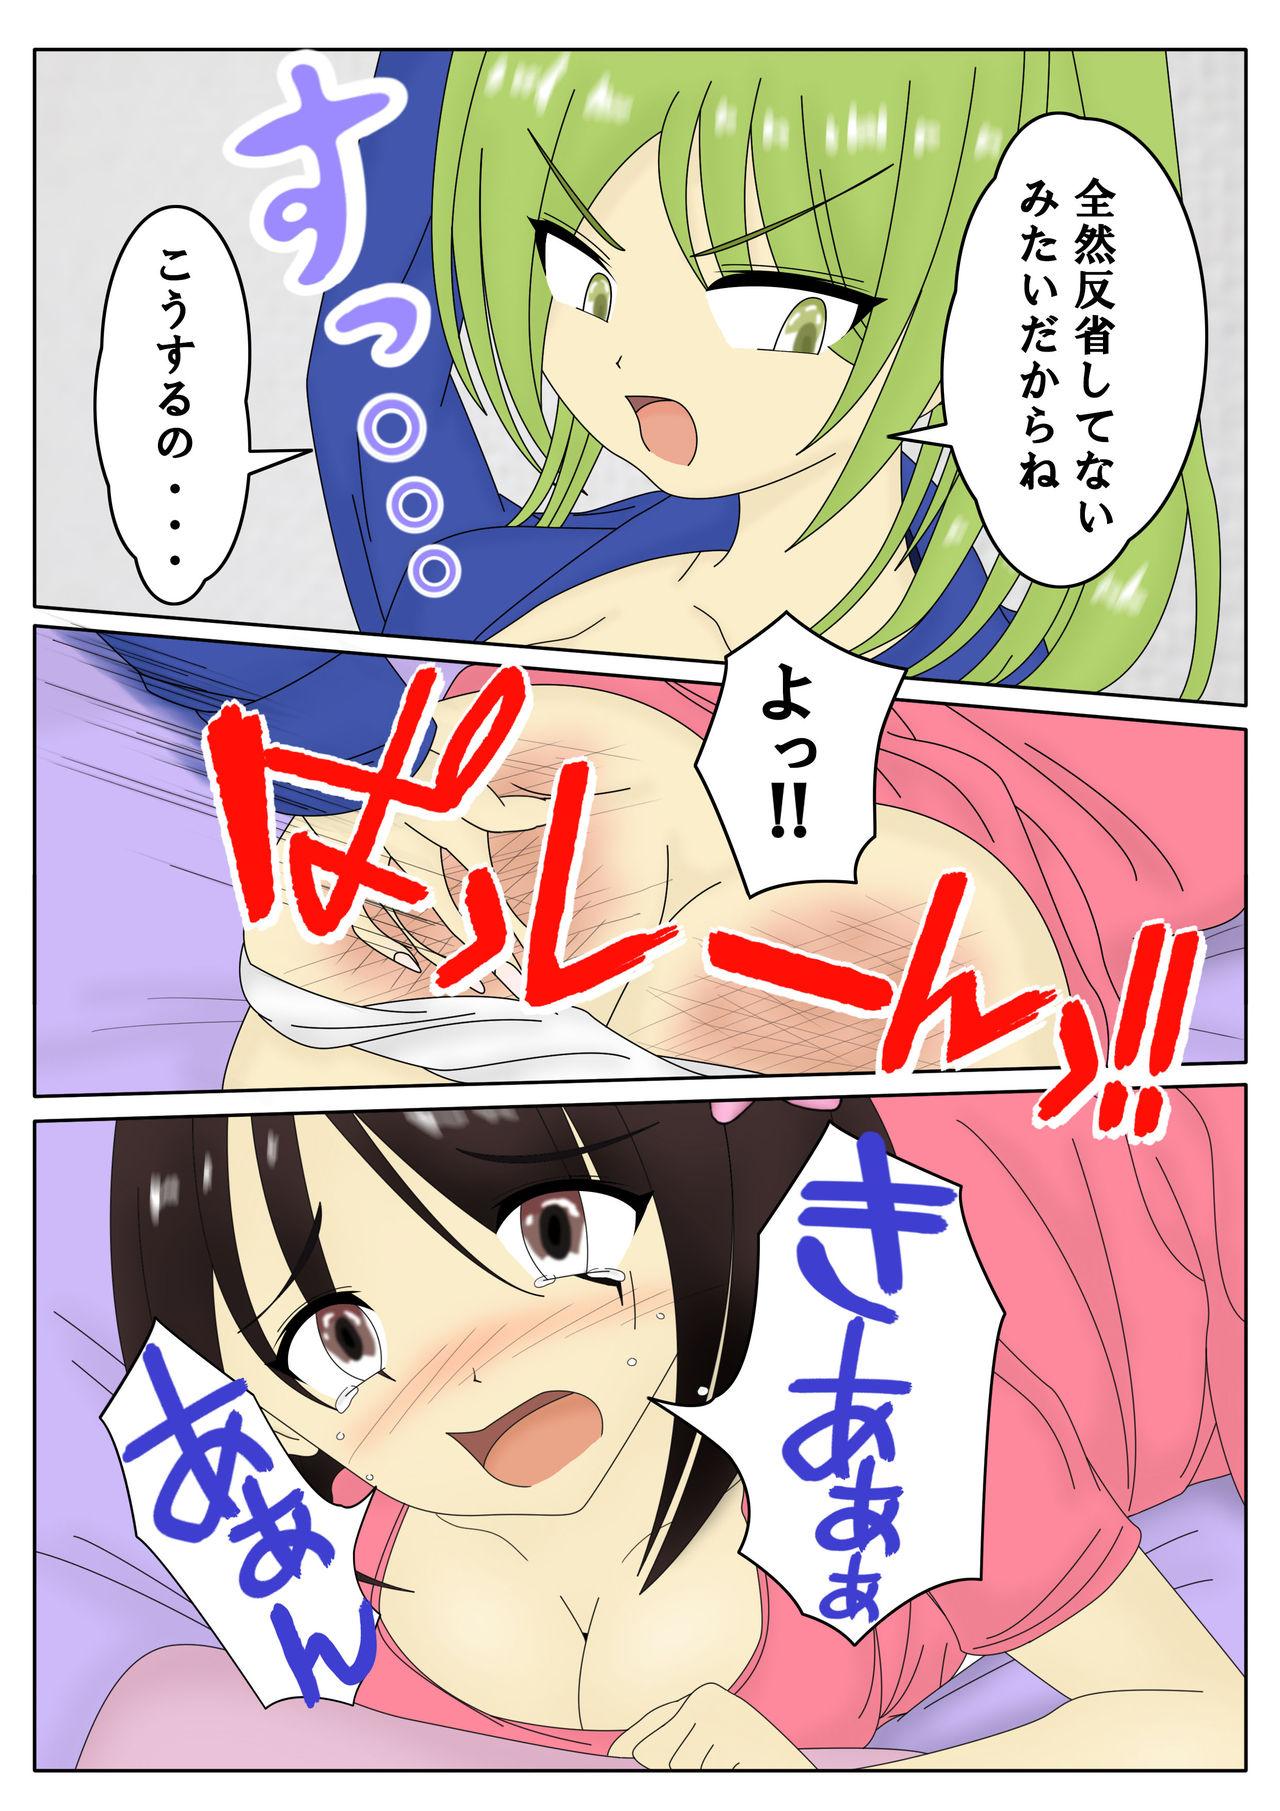 Chacal スパンキング漫画 - Original Solo Female - Page 6